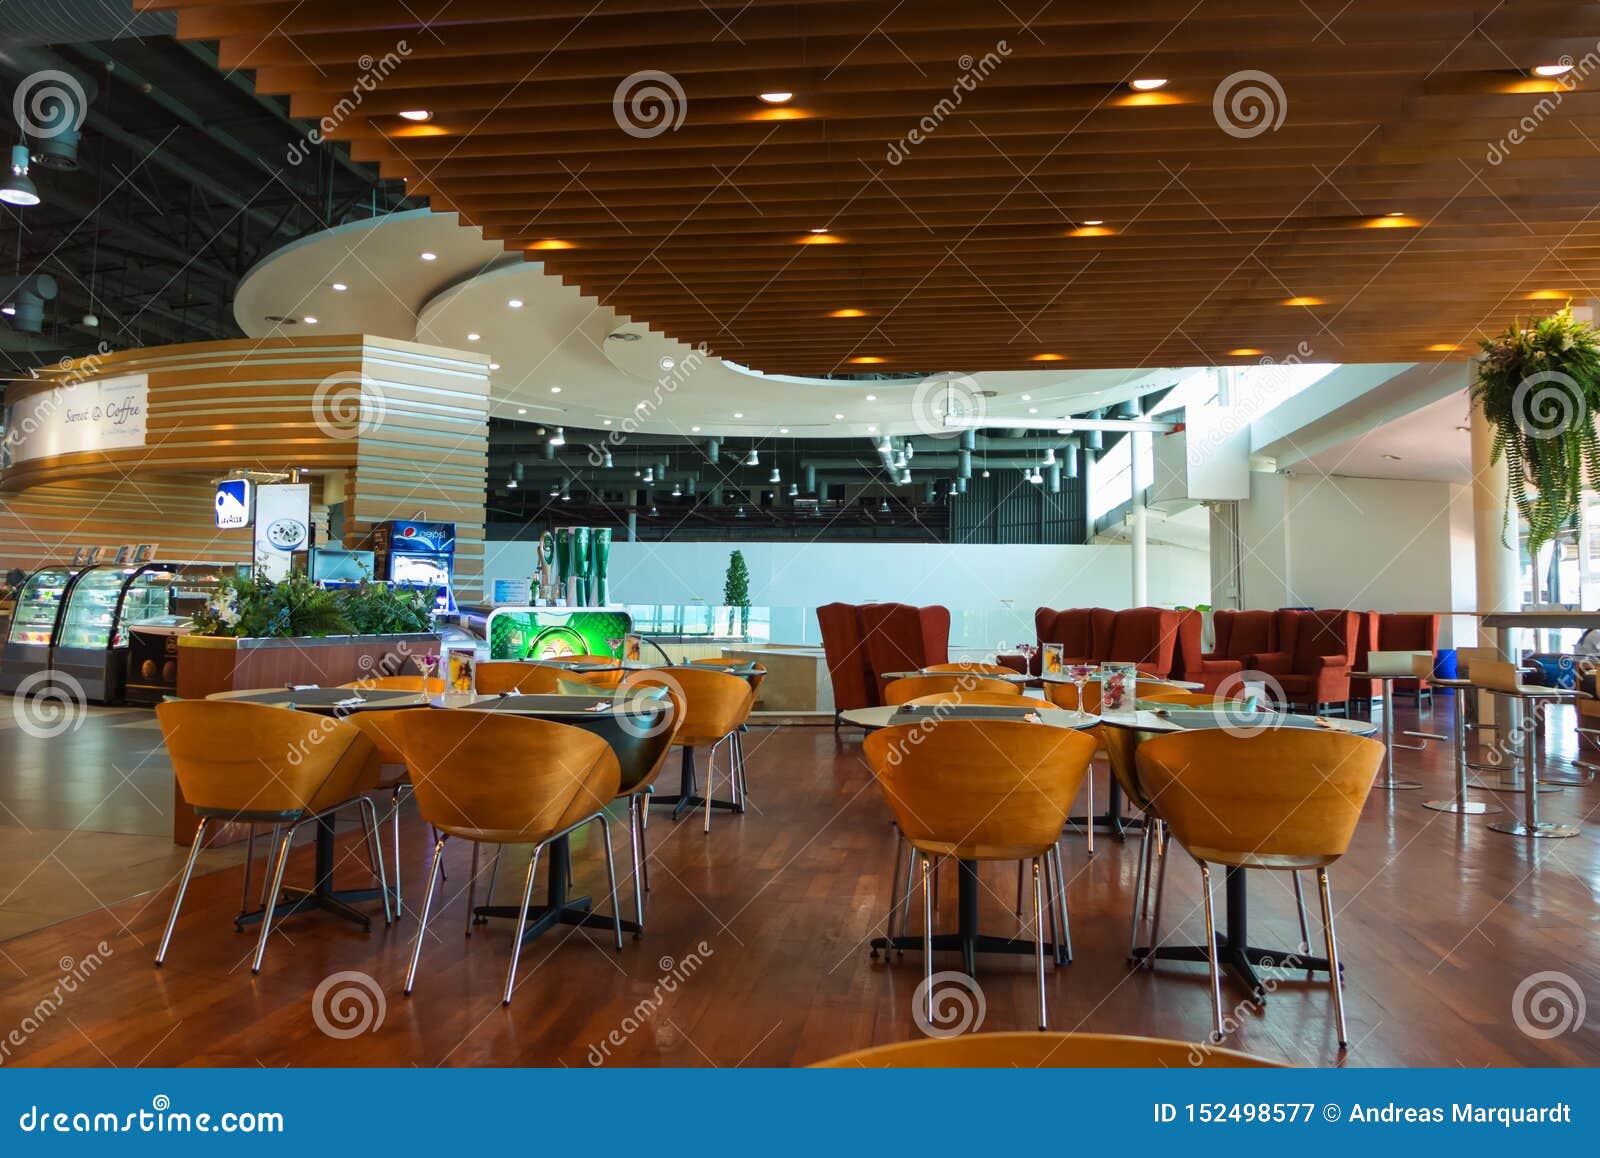 The Food Floor In The Royal Garden Plaza Editorial Photography - Image Of Travel Wood 152498577